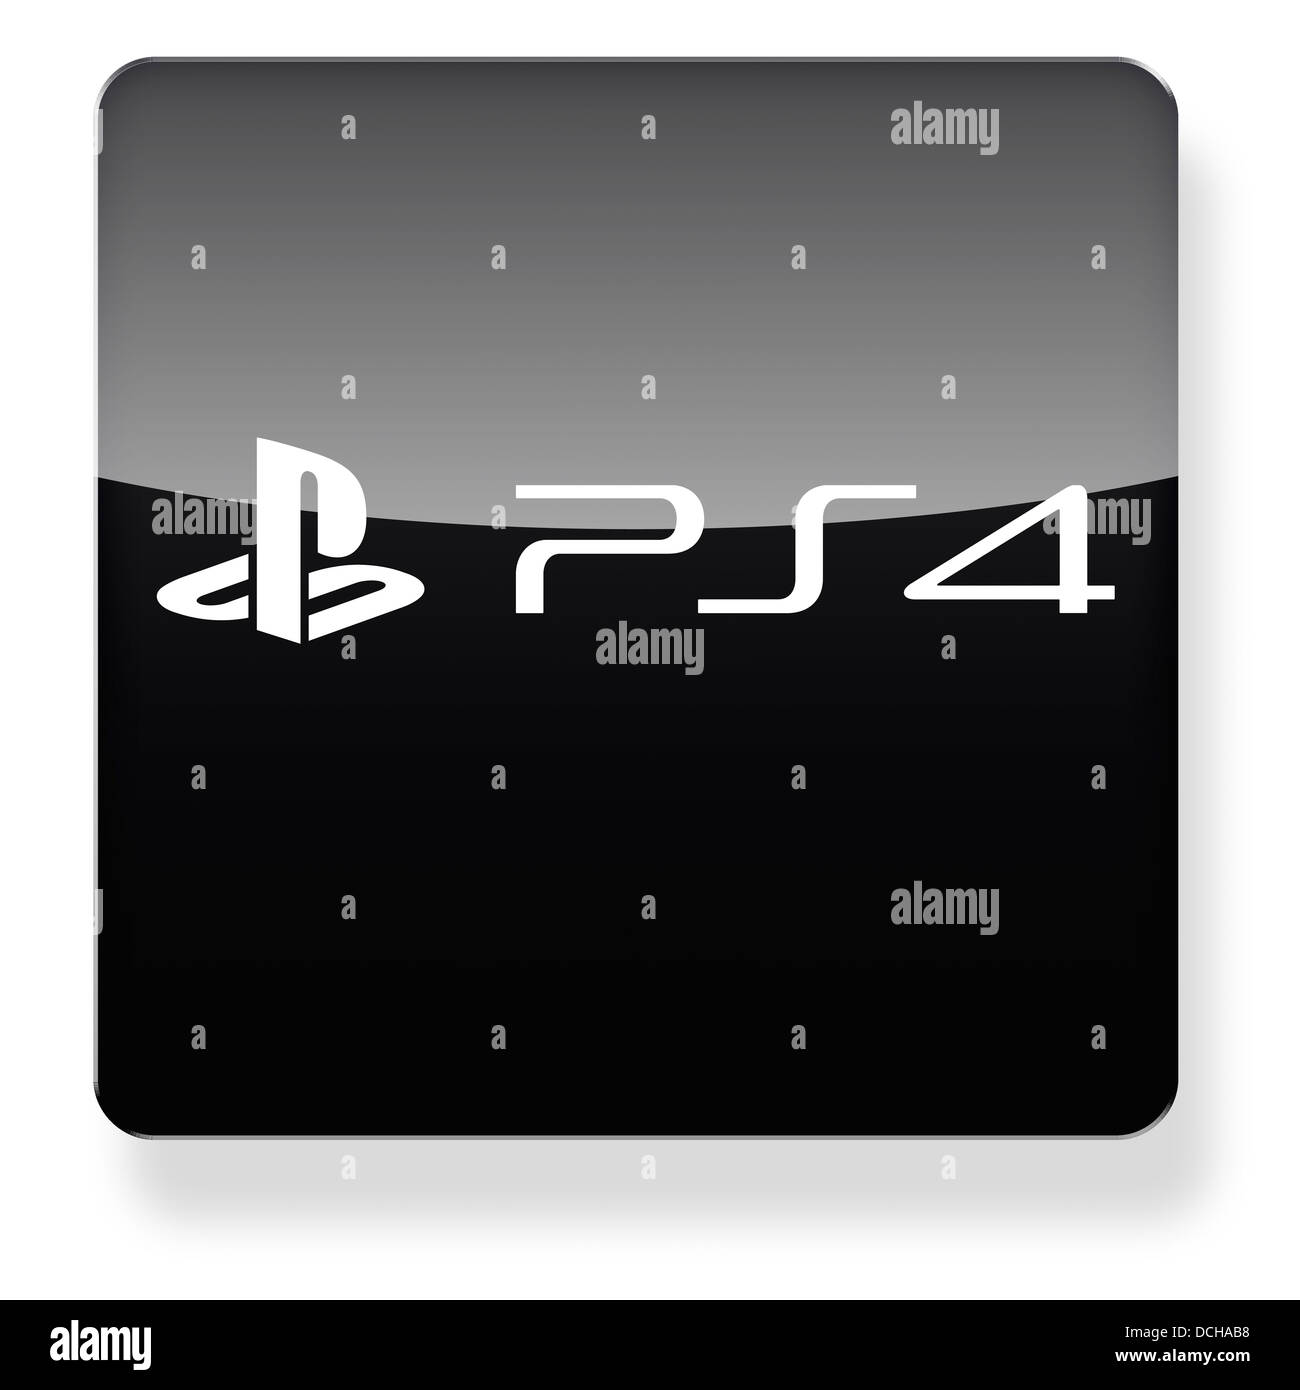 Playstation 4 PS4 logo an app icon. Clipping path included Photo - Alamy